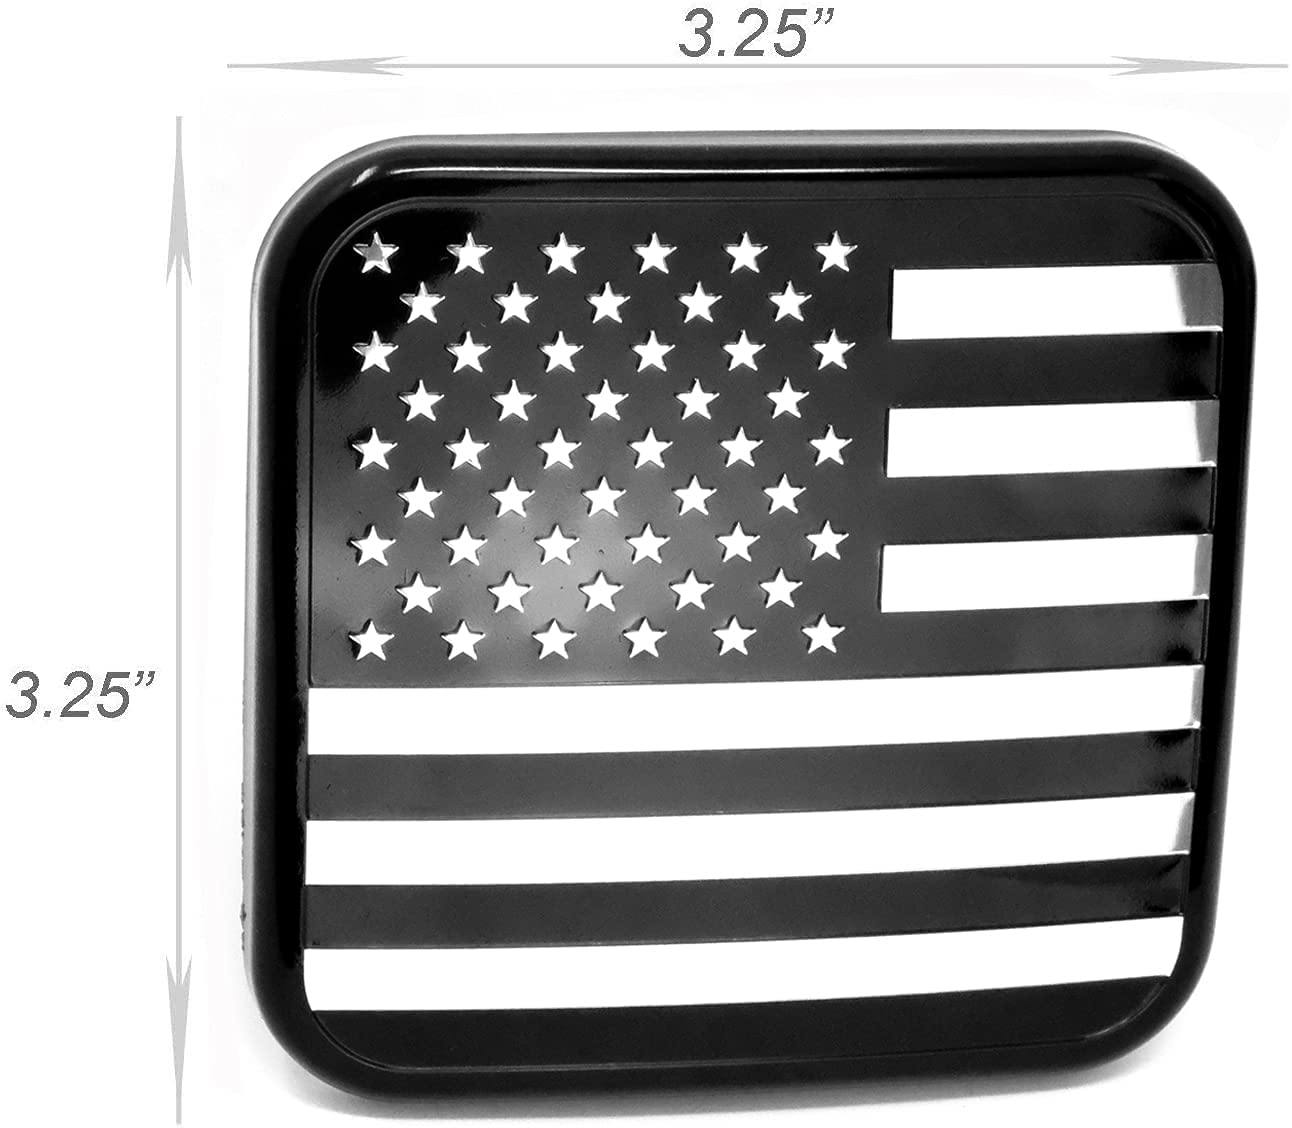 American Metal Flag Trailer Hitch Cover (Black Chrome) Fits 2" Hitch Receivers.